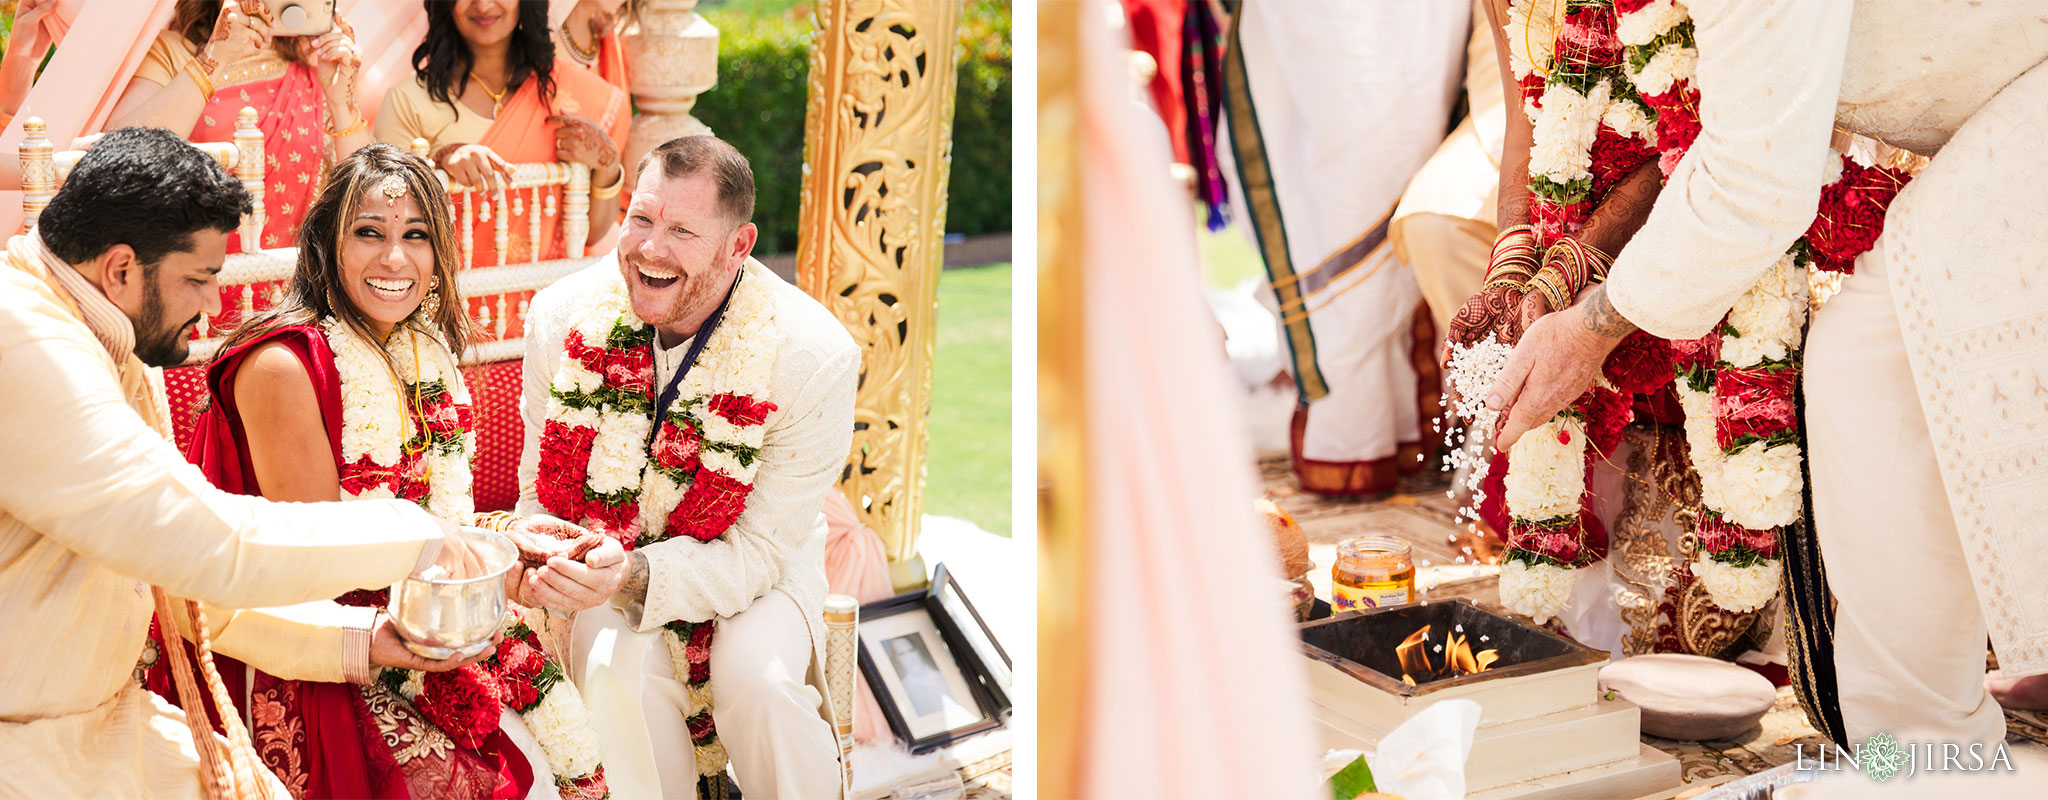 037 sherwood country club indian wedding ceremony photography